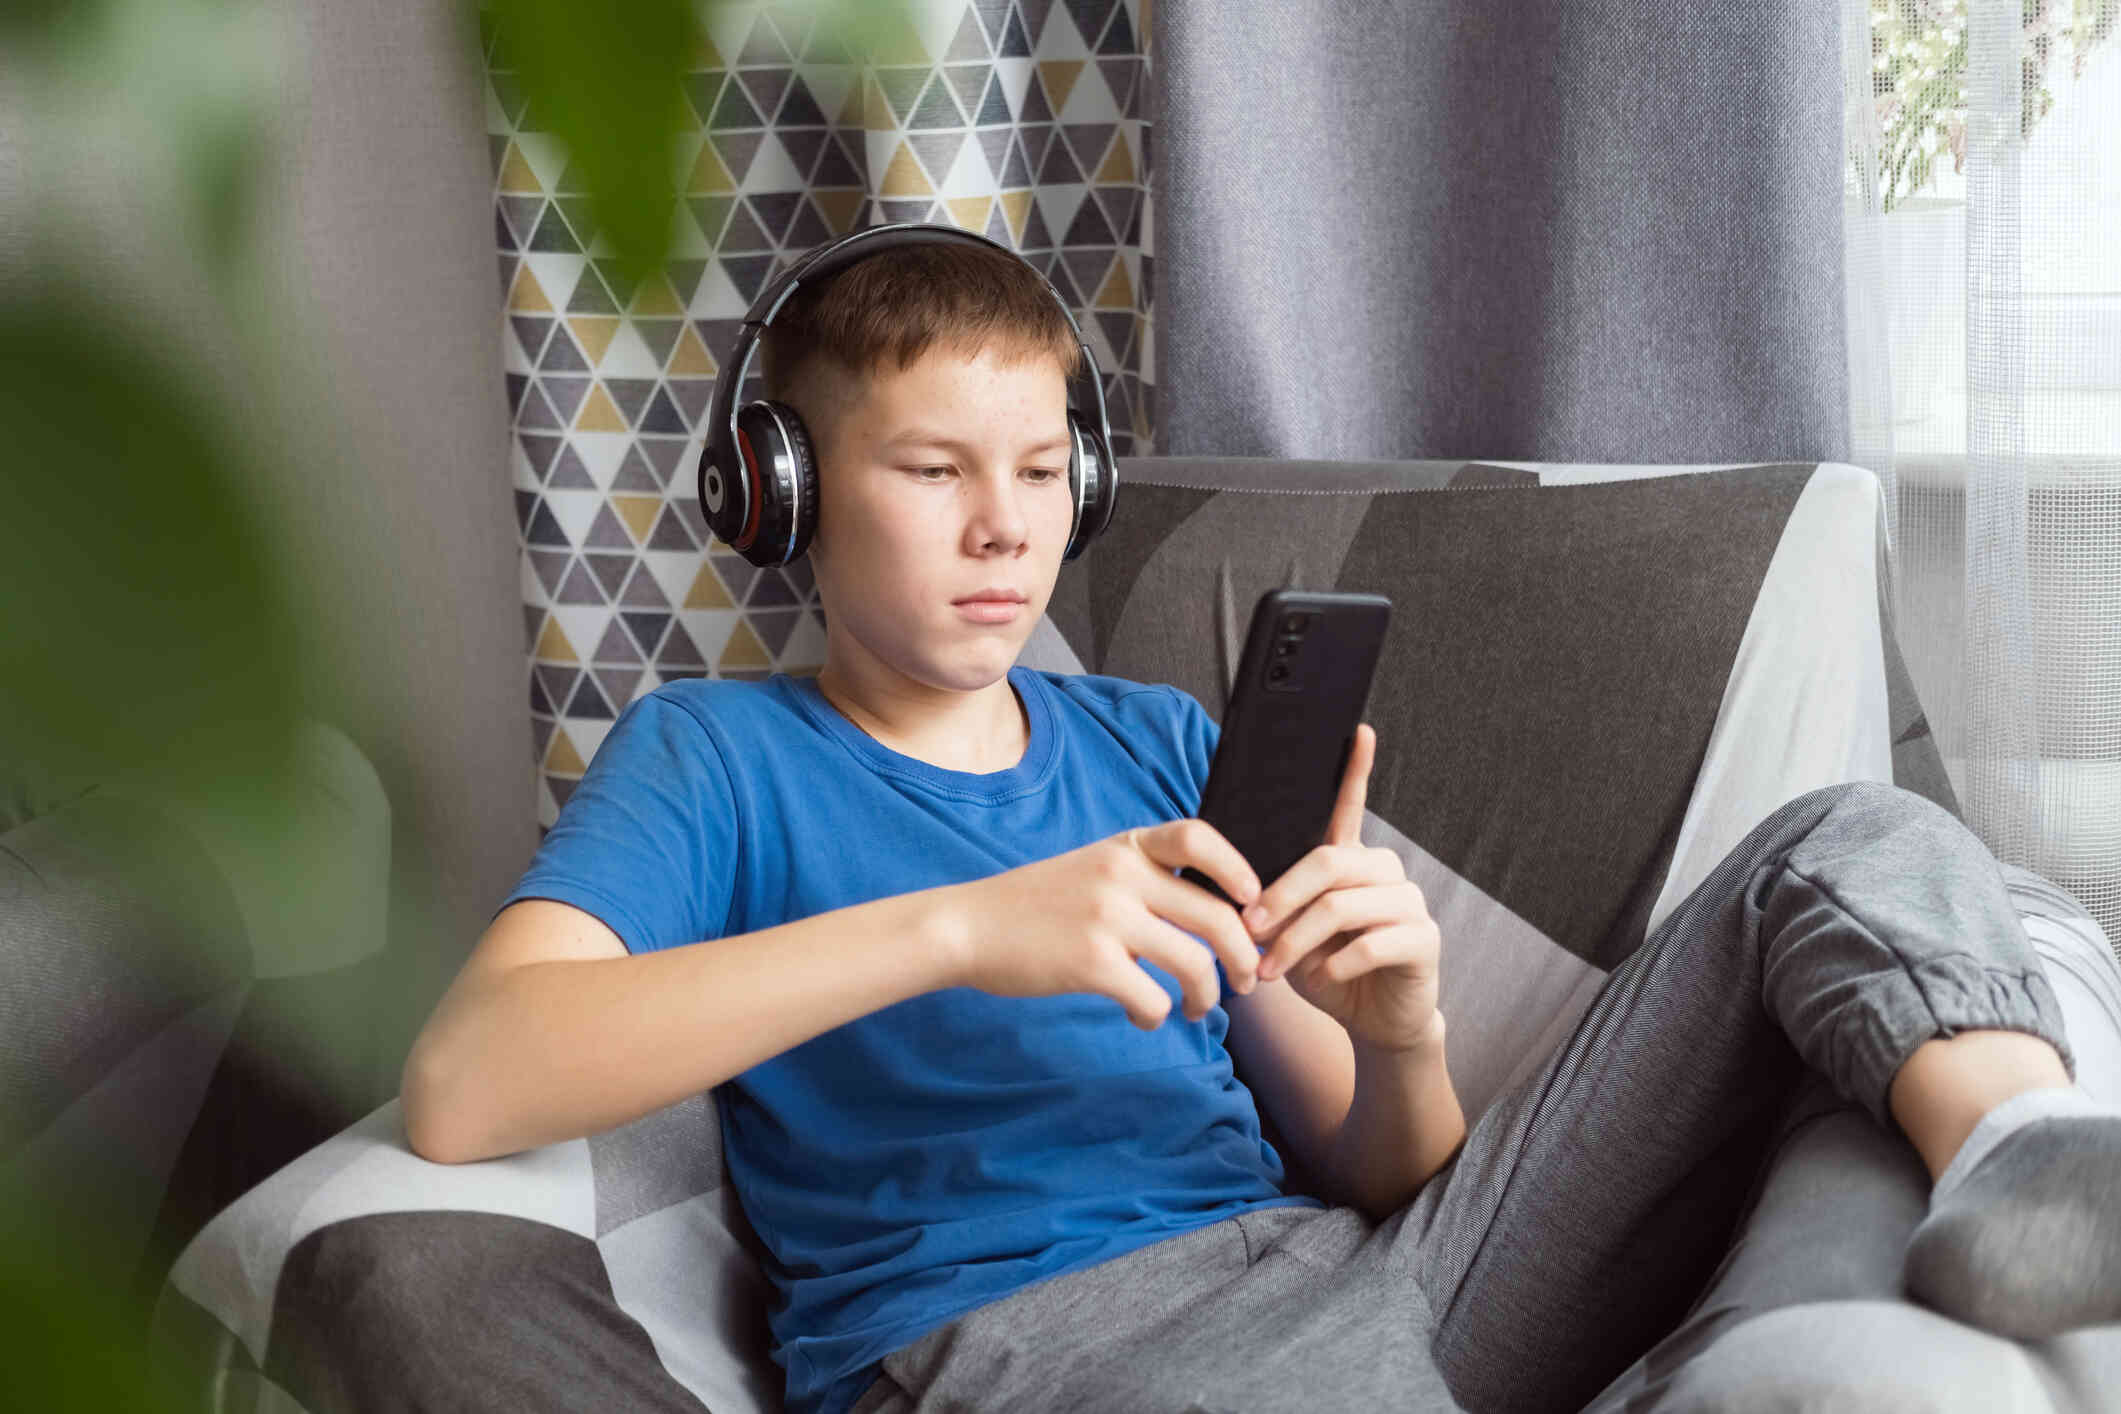 A young boy in a blue shirt sits casually on the couch while wearing over the ear headphones and looking at the cellphone in his hands.